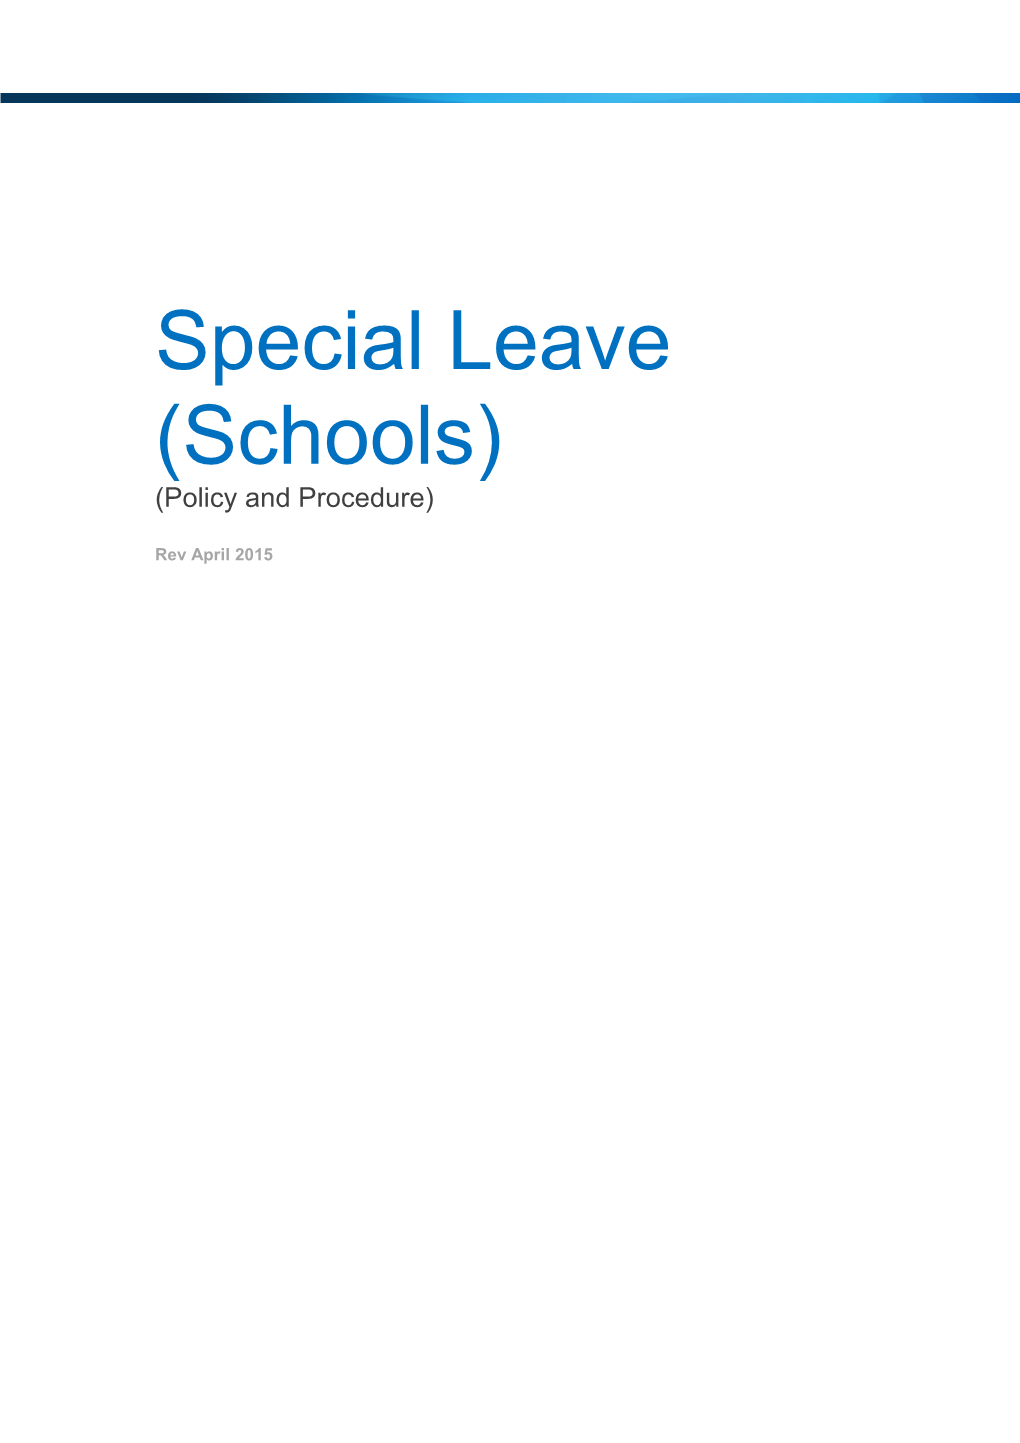 Special Leave (Schools)